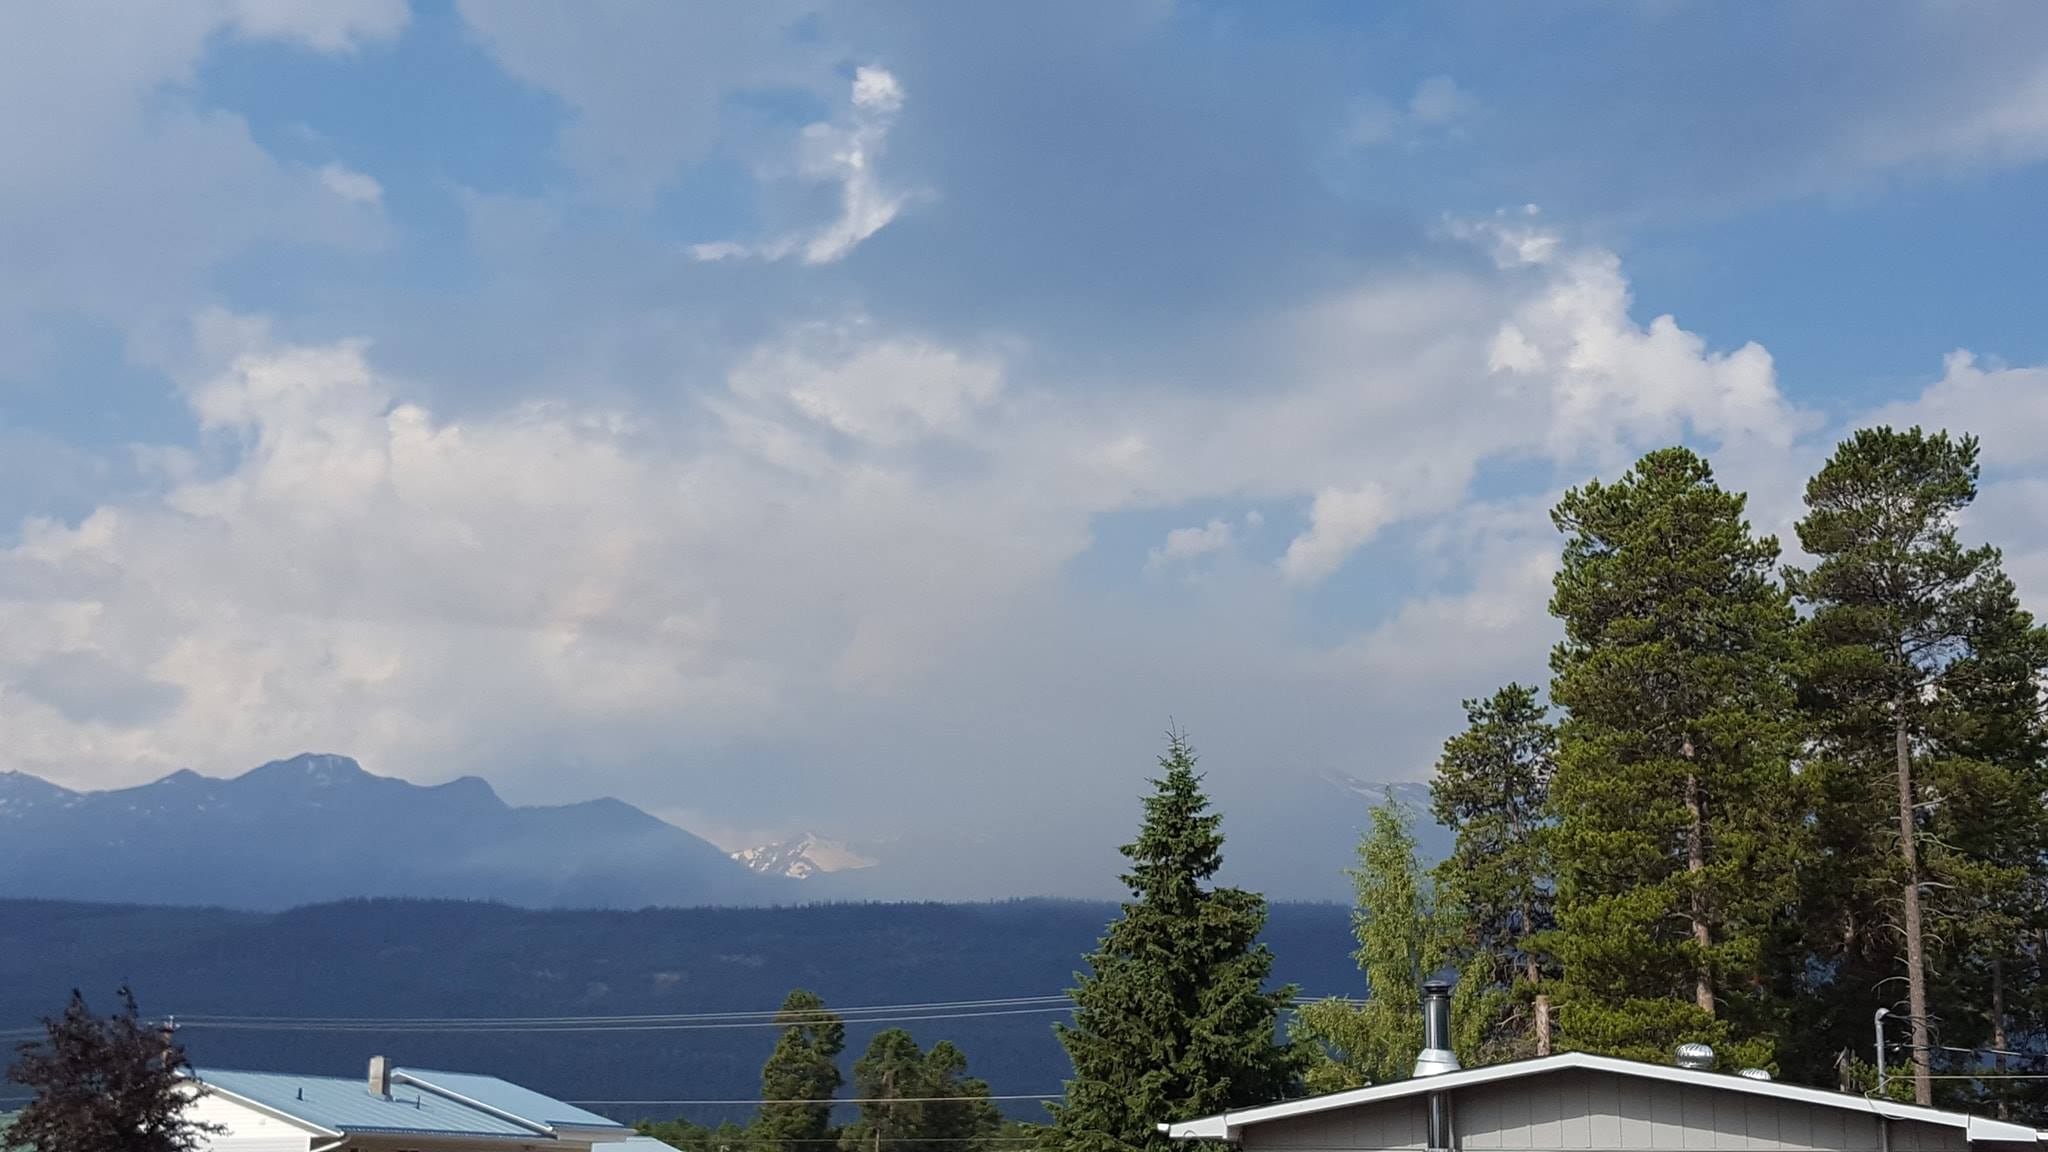 Forecasted rain expected to calm wildfires west of Valemount